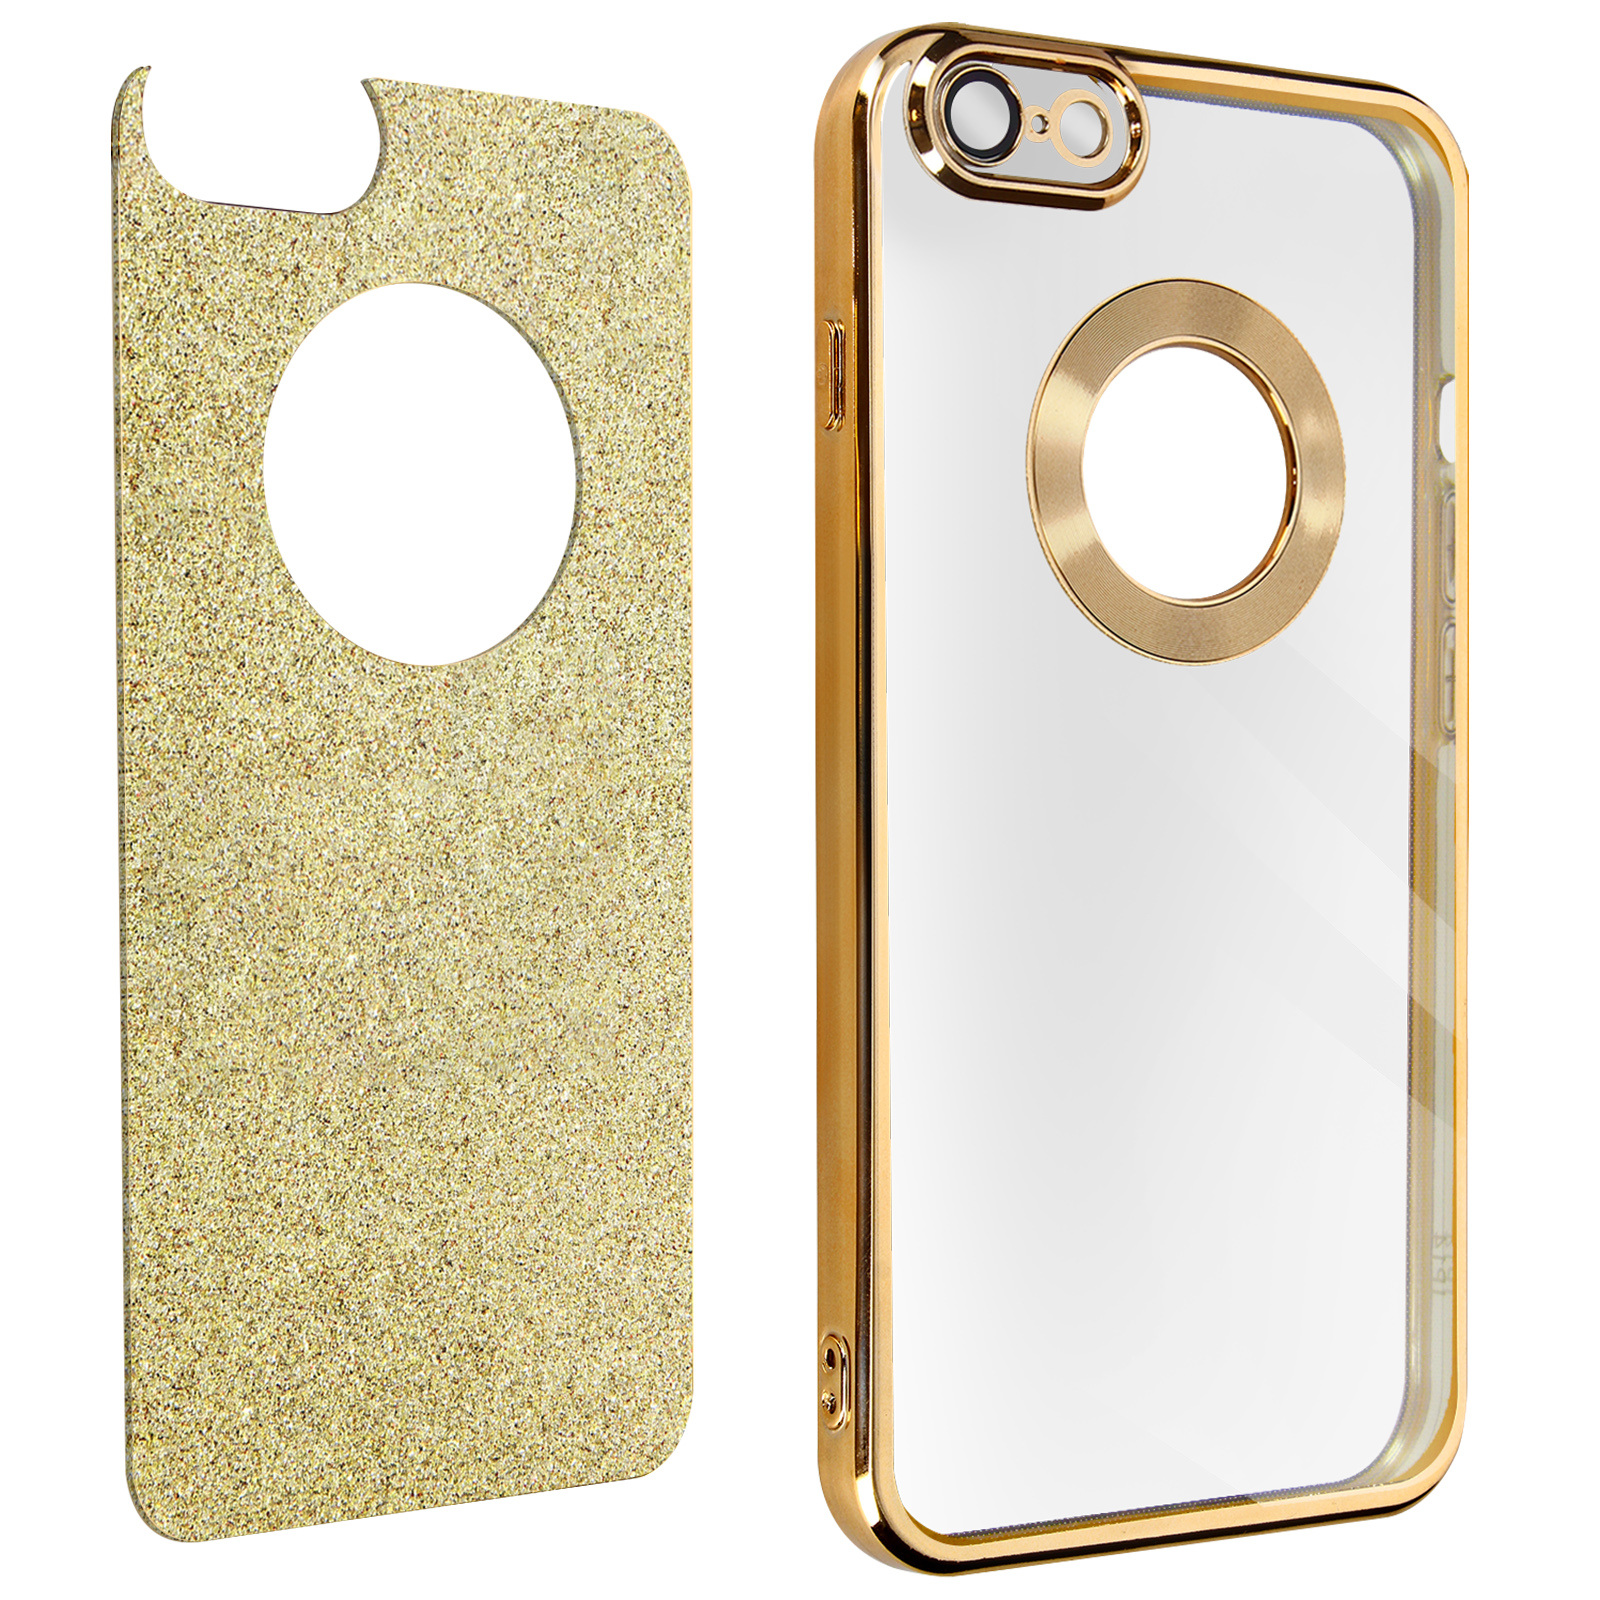 AVIZAR Protecam Spark Series, Backcover, 6S iPhone Plus, Gold Apple